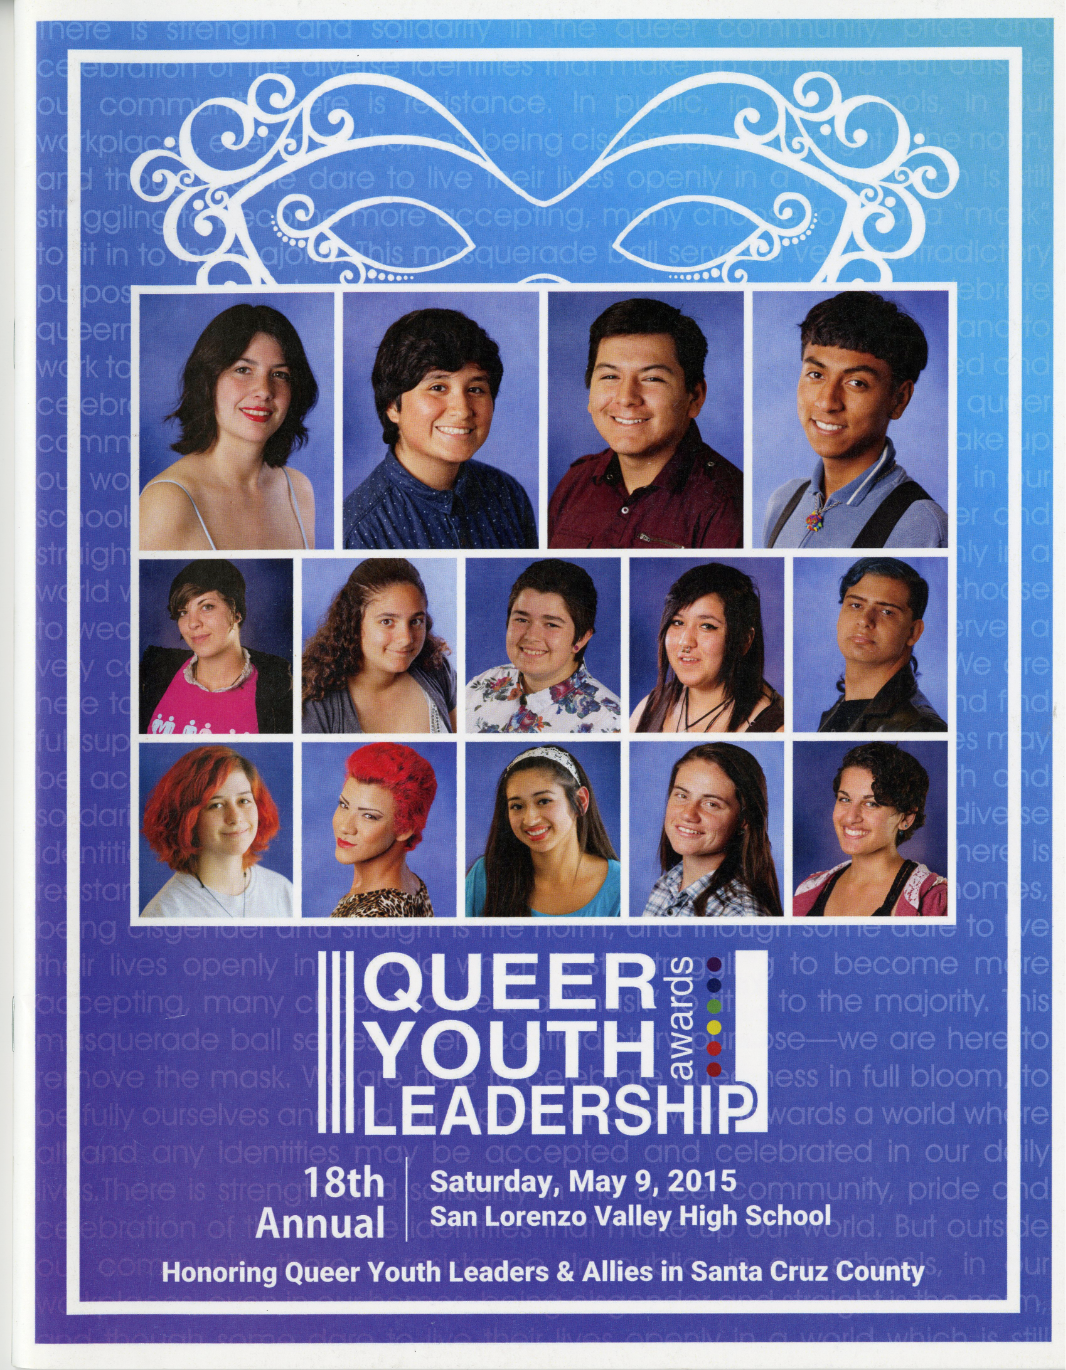 Queer Youth Leadership Awards Poster